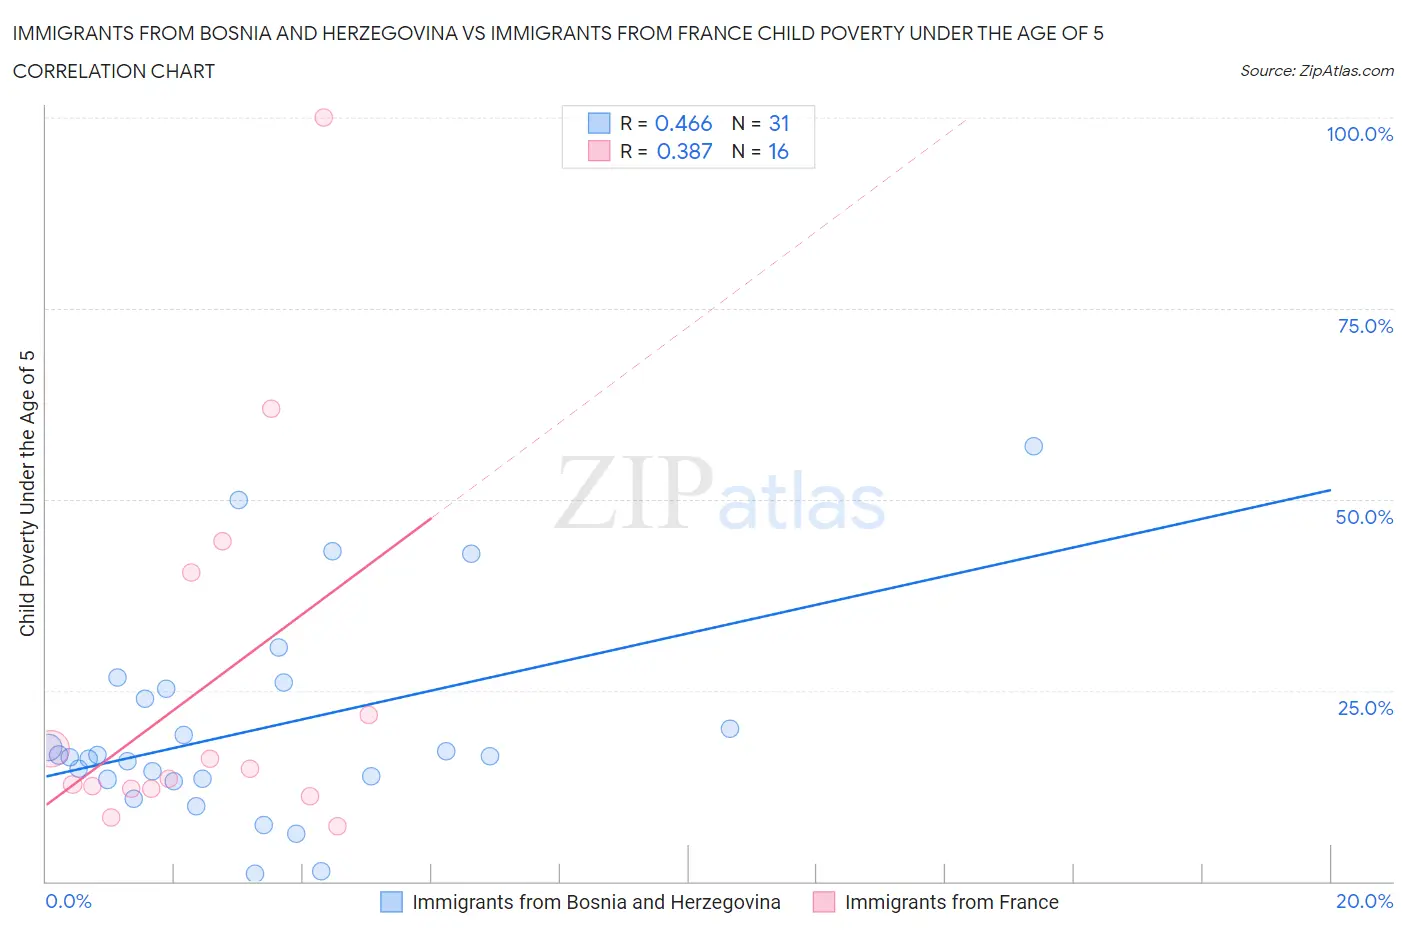 Immigrants from Bosnia and Herzegovina vs Immigrants from France Child Poverty Under the Age of 5